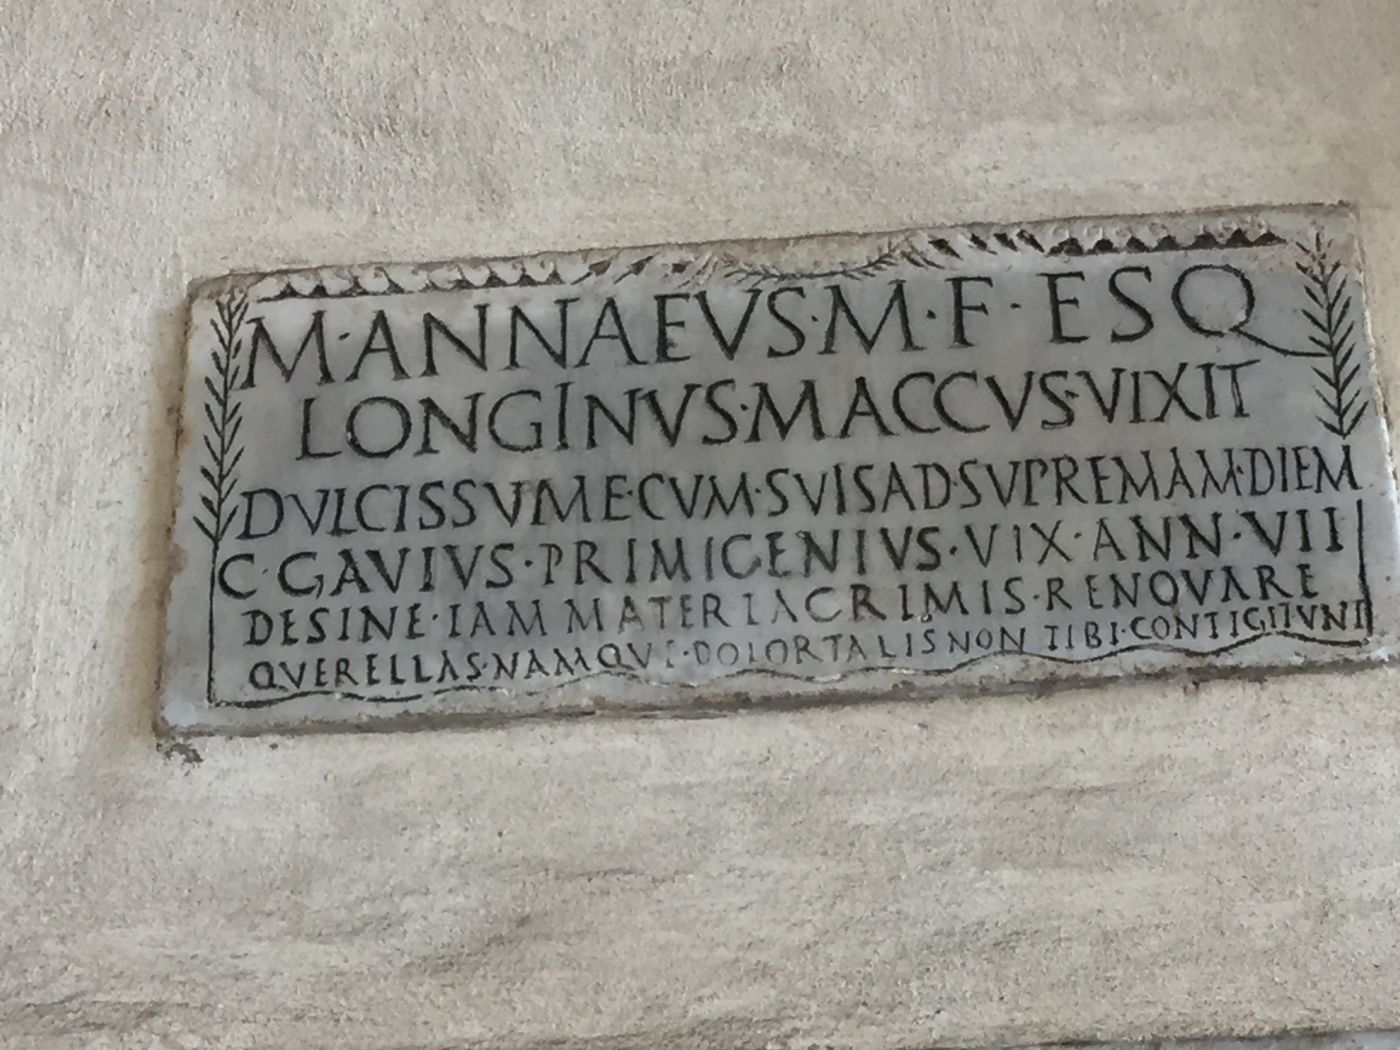 Epitaph (first century AD) of the actor M. Annaeus Longinus, of the Esquiline tribe, who played the role of the Atellane character Maccus “Mr Stupid”. It was discovered in the catacombs of SS Gordianus and Epimachus in Rome, and is now placed in the walls of the portico of Santa Maria in Trastevere, Rome (CIL 6.10105 = ILS 5219 = CLE 823) (photograph taken by C. Panayotakis).